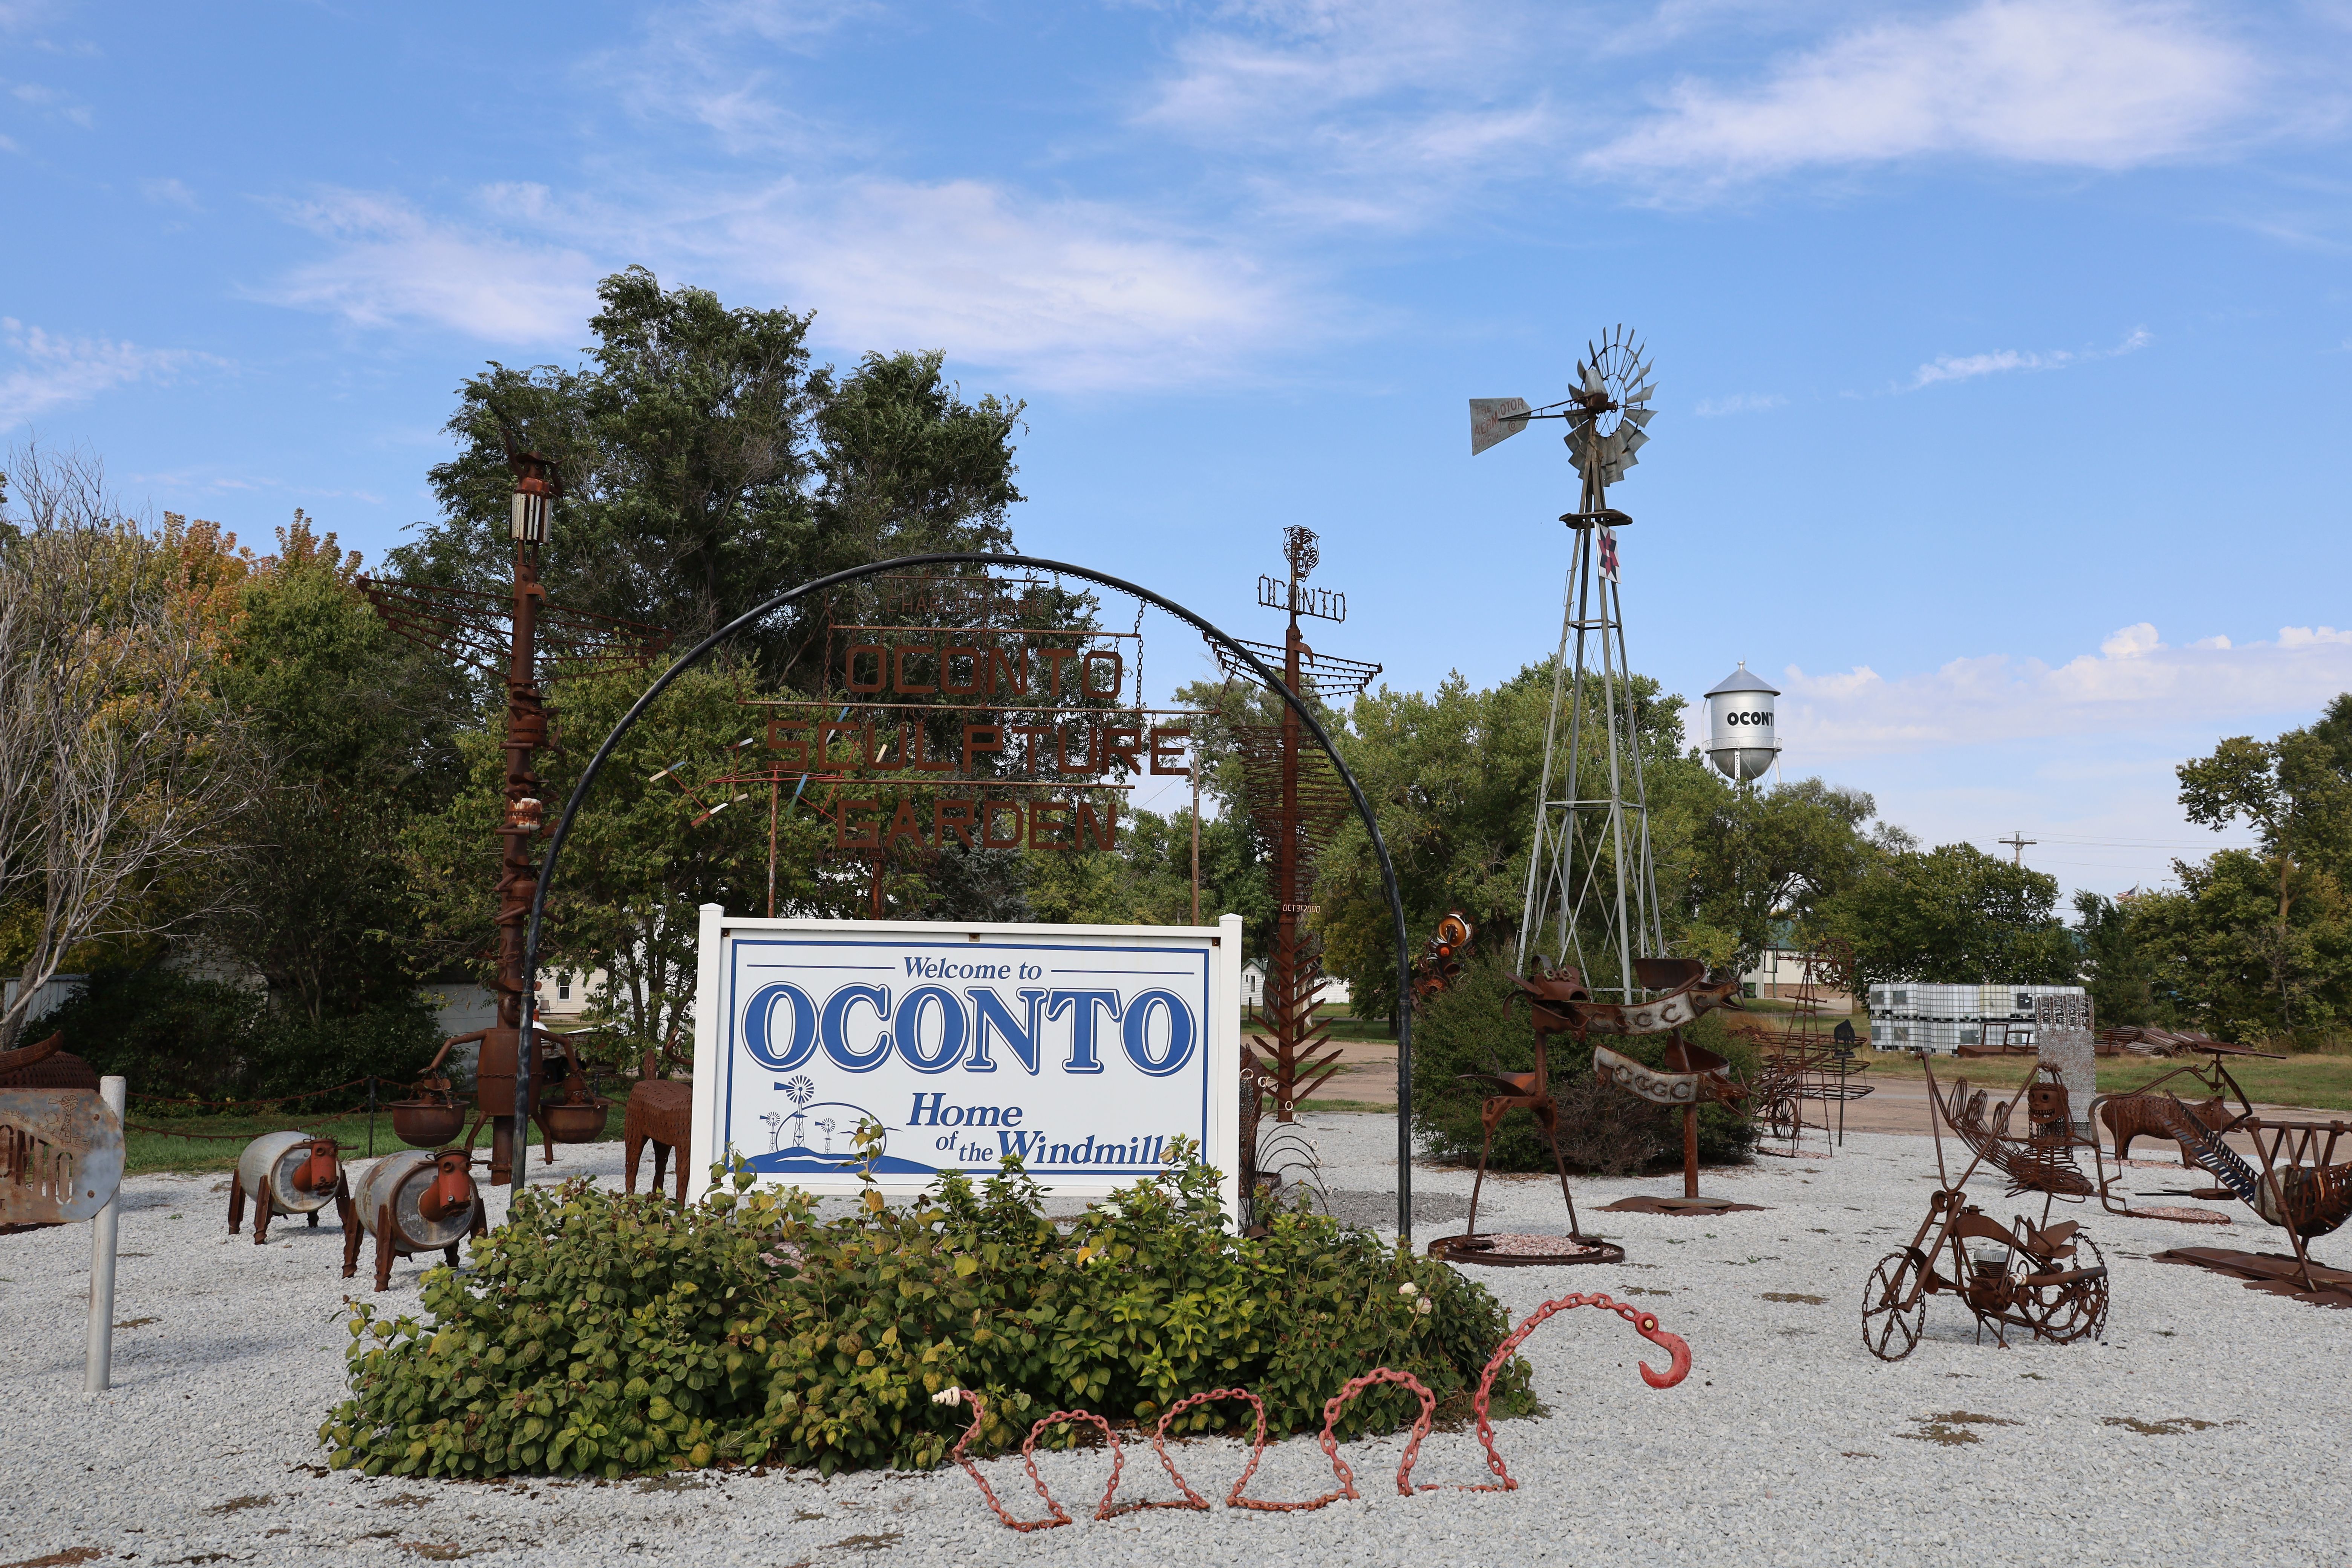 We have a new member - the Village of Oconto!